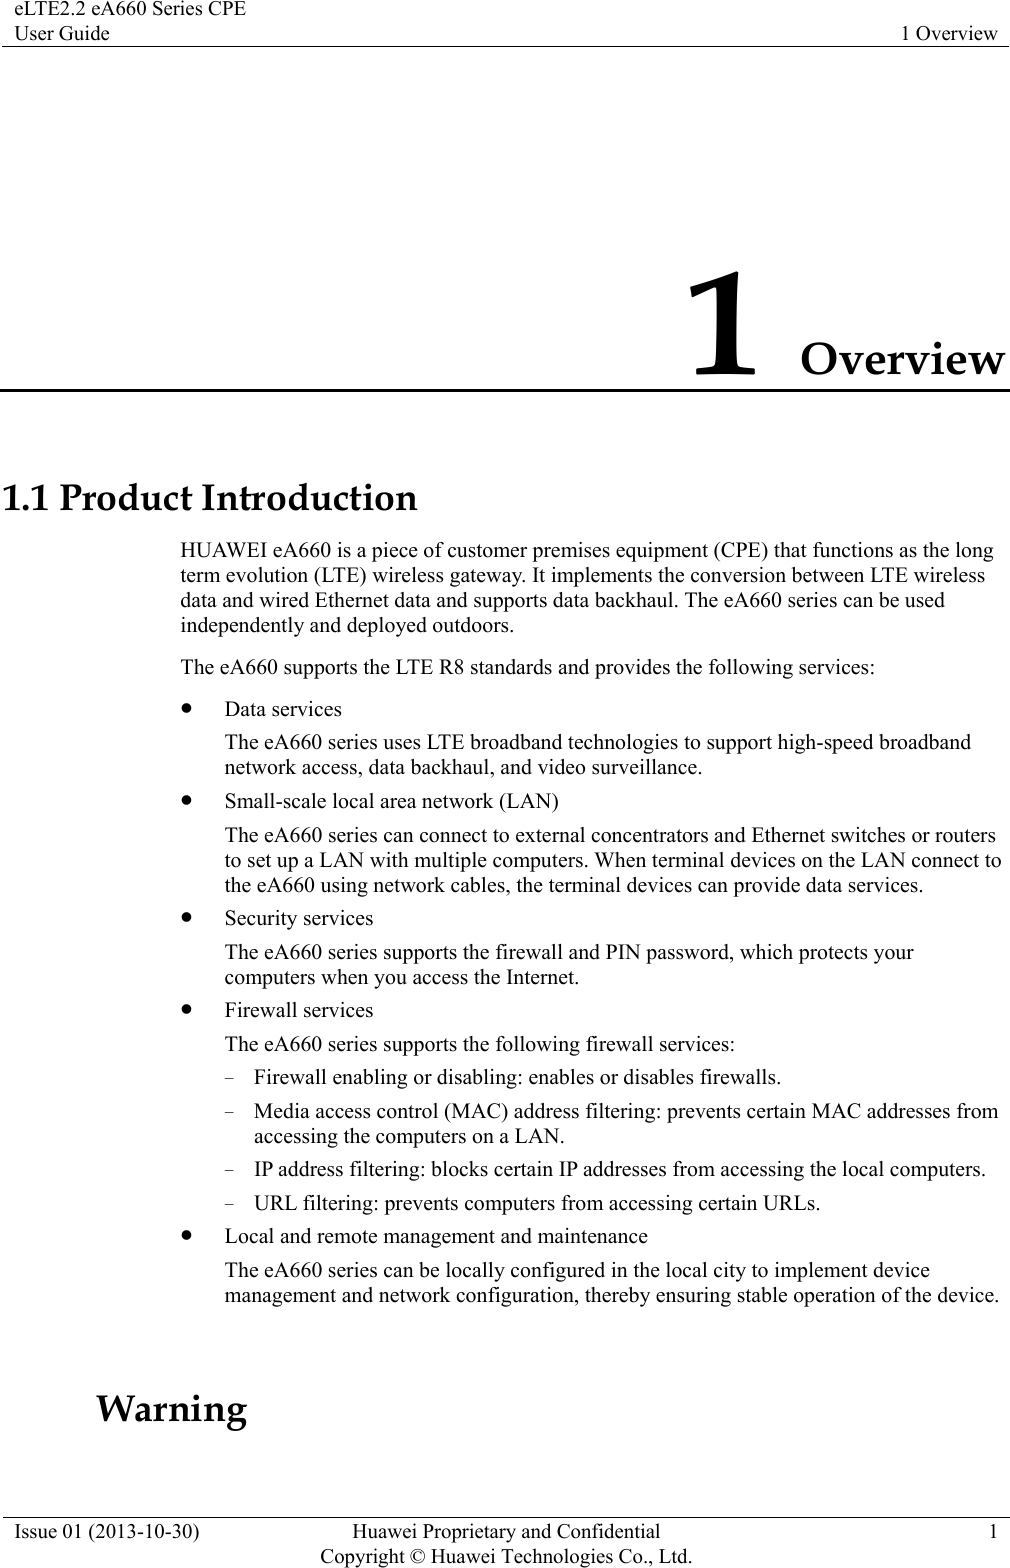 eLTE2.2 eA660 Series CPE User Guide  1 Overview Issue 01 (2013-10-30)  Huawei Proprietary and Confidential         Copyright © Huawei Technologies Co., Ltd.1 1 Overview 1.1 Product Introduction HUAWEI eA660 is a piece of customer premises equipment (CPE) that functions as the long term evolution (LTE) wireless gateway. It implements the conversion between LTE wireless data and wired Ethernet data and supports data backhaul. The eA660 series can be used independently and deployed outdoors.   The eA660 supports the LTE R8 standards and provides the following services: z Data services The eA660 series uses LTE broadband technologies to support high-speed broadband network access, data backhaul, and video surveillance. z Small-scale local area network (LAN) The eA660 series can connect to external concentrators and Ethernet switches or routers to set up a LAN with multiple computers. When terminal devices on the LAN connect to the eA660 using network cables, the terminal devices can provide data services.   z Security services The eA660 series supports the firewall and PIN password, which protects your computers when you access the Internet. z Firewall services The eA660 series supports the following firewall services: − Firewall enabling or disabling: enables or disables firewalls. − Media access control (MAC) address filtering: prevents certain MAC addresses from accessing the computers on a LAN. − IP address filtering: blocks certain IP addresses from accessing the local computers. − URL filtering: prevents computers from accessing certain URLs. z Local and remote management and maintenance The eA660 series can be locally configured in the local city to implement device management and network configuration, thereby ensuring stable operation of the device.       Warning 